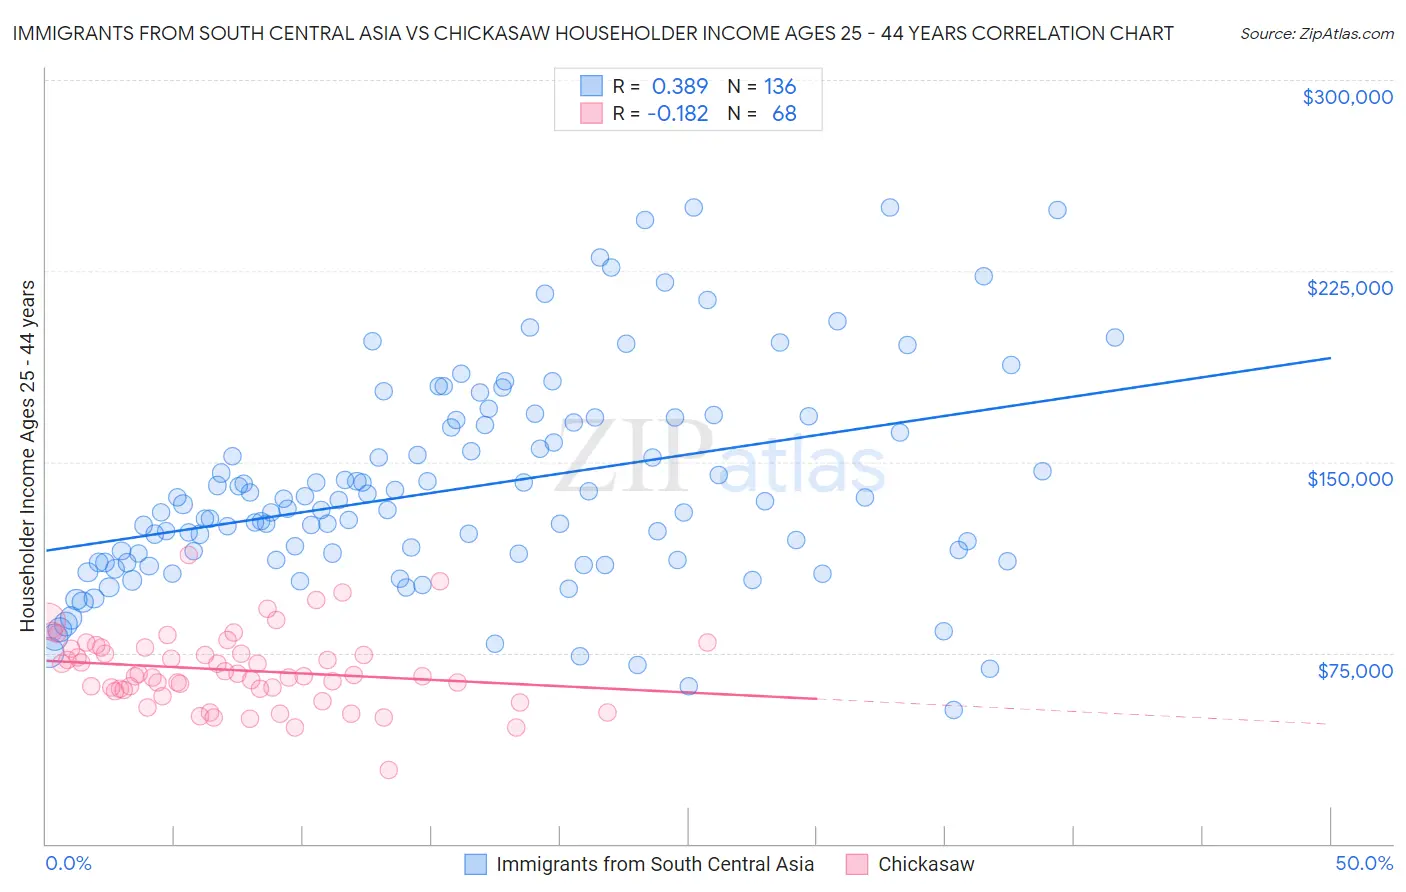 Immigrants from South Central Asia vs Chickasaw Householder Income Ages 25 - 44 years